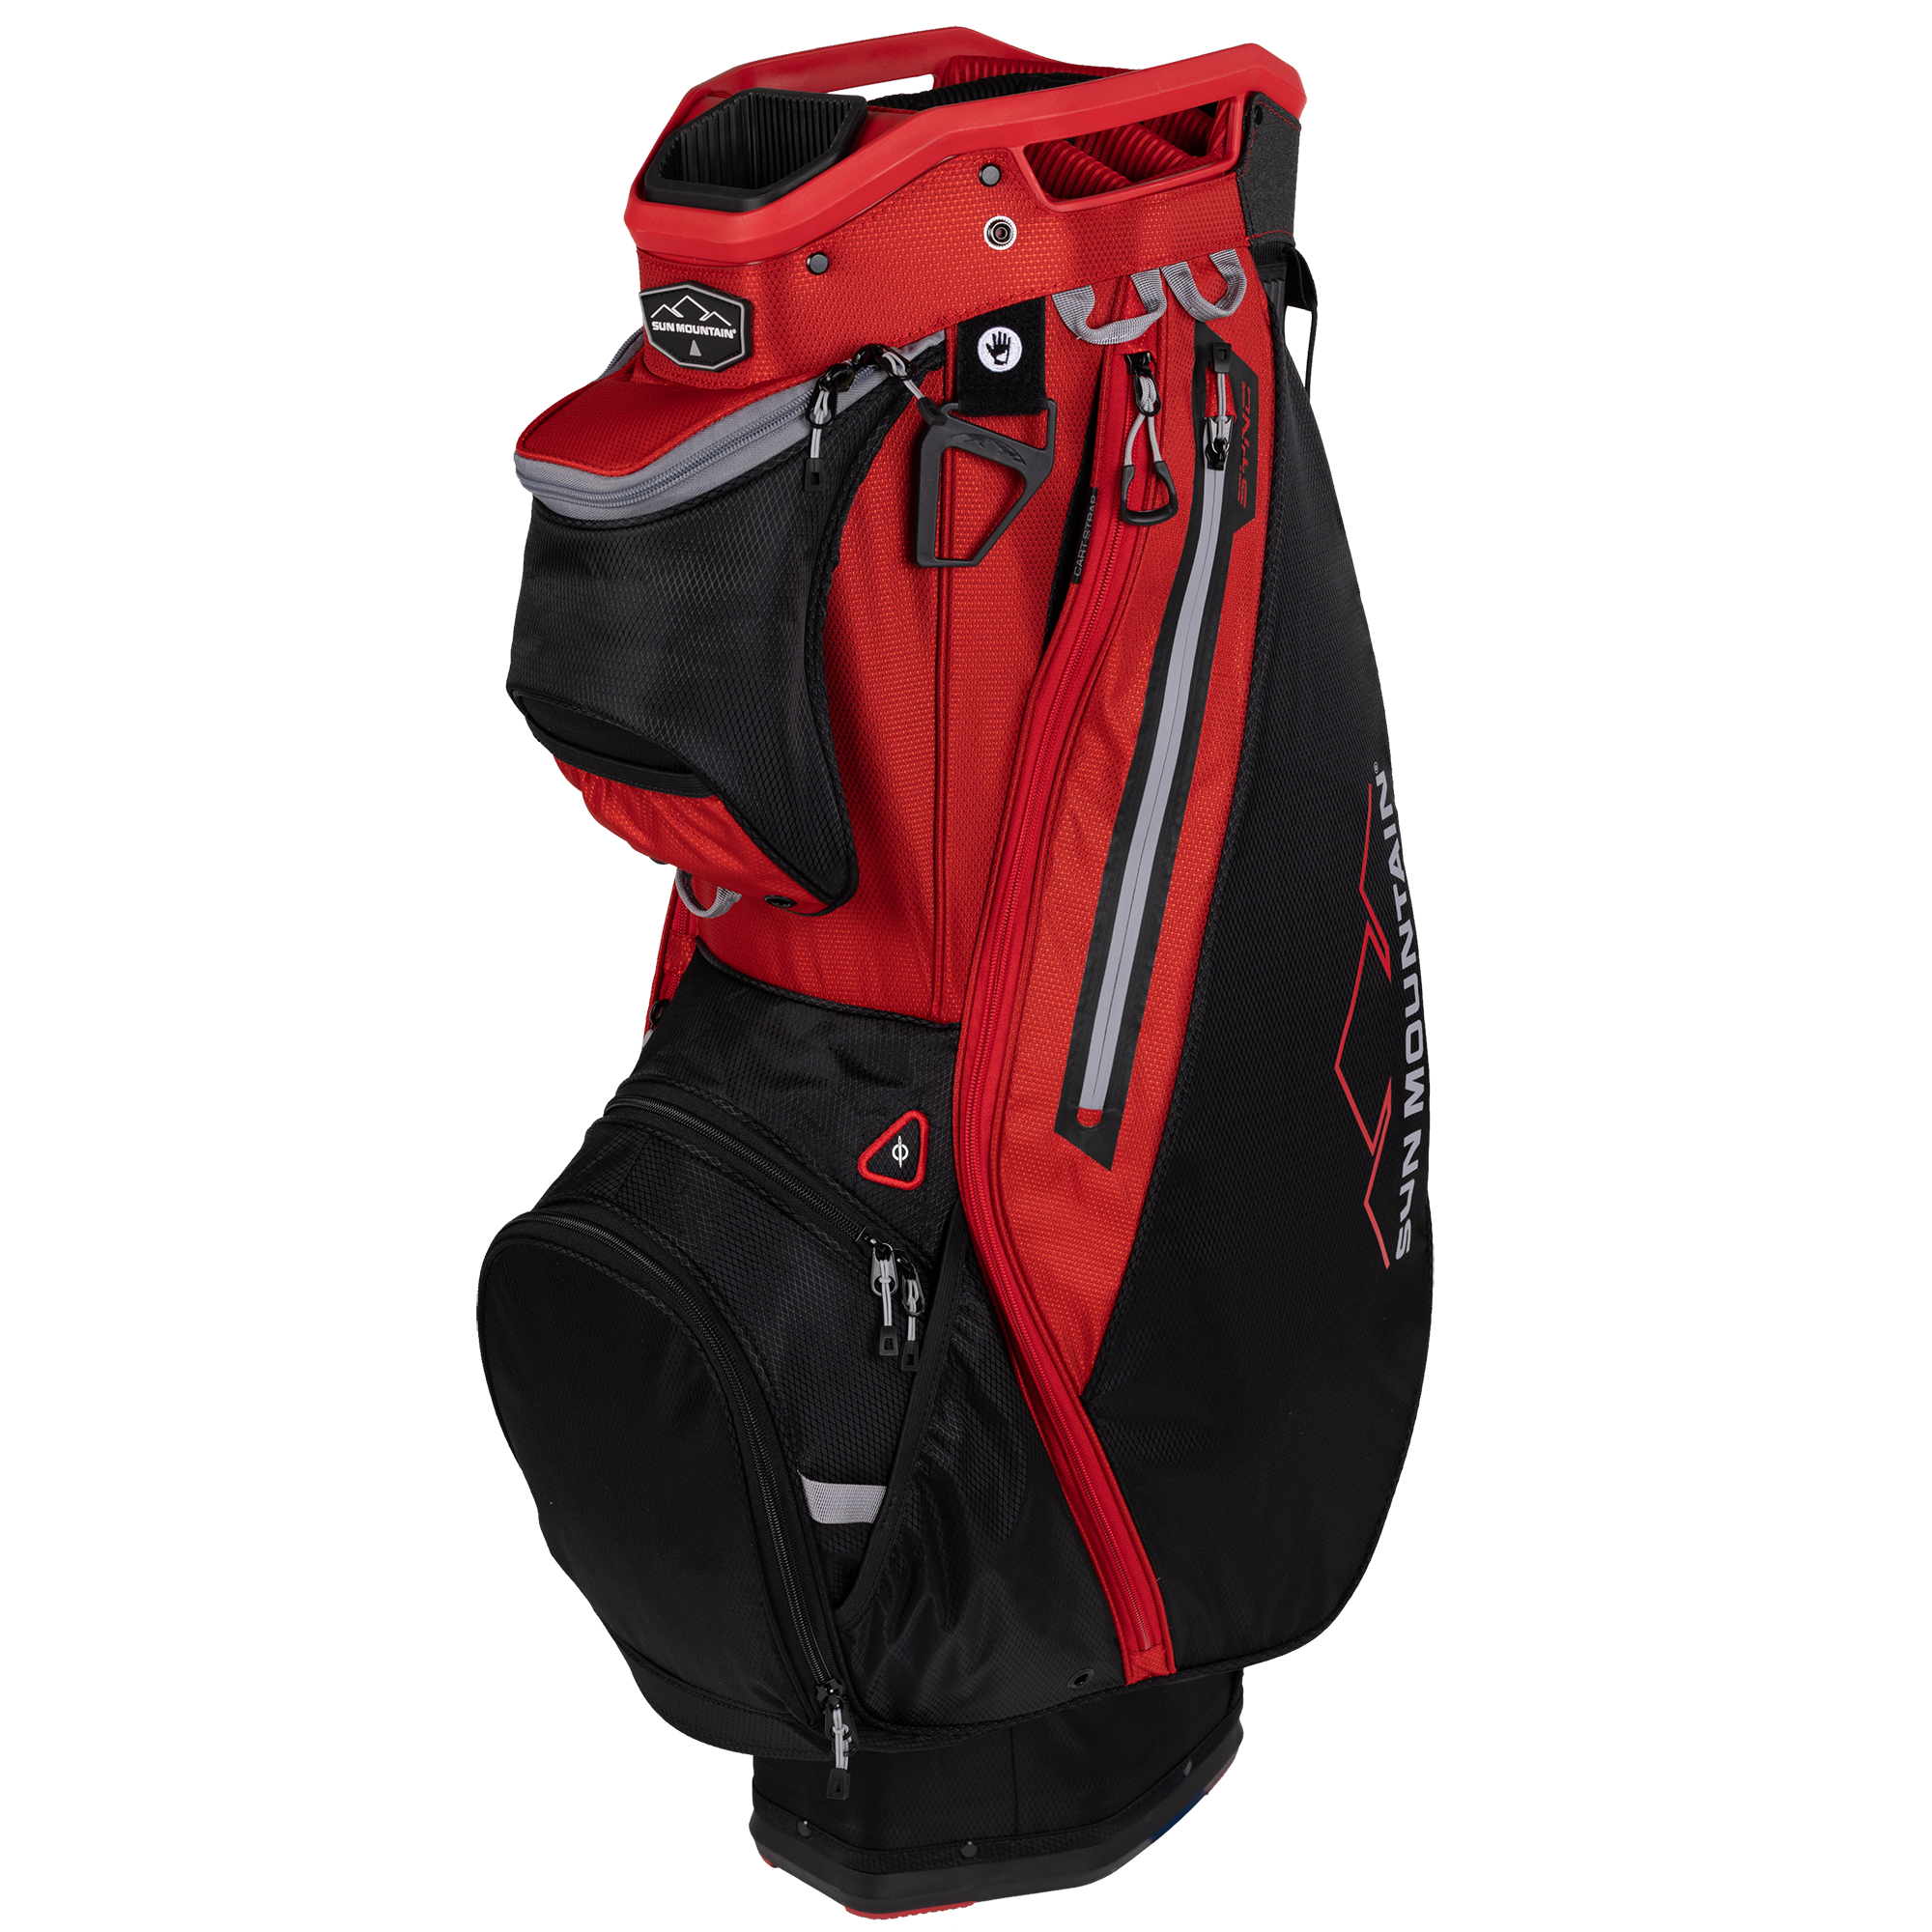 Sun Mountain Golf Bags, Carts and Apparel  Proudly Assembled in MT –  SunMountainSports